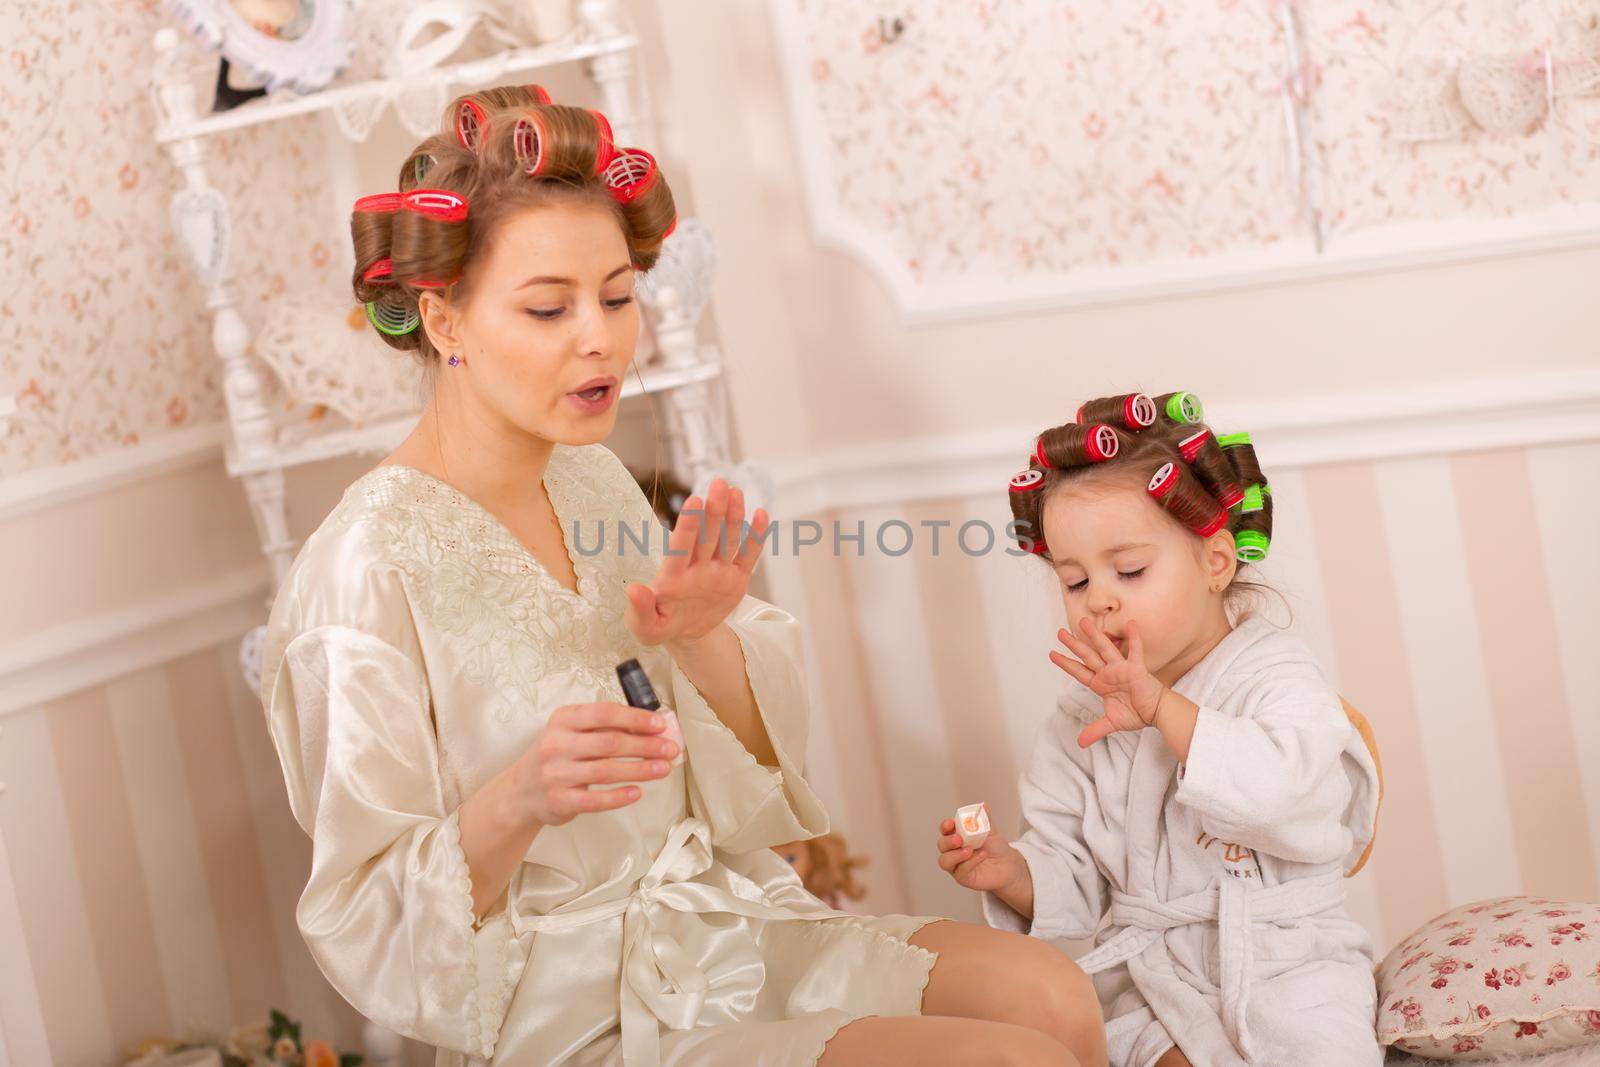 Adorable little girl with her mother in curlers paint their fingernails. Copies mom's behavior. Mom teaches her daughter to take care of herself. Beauty day.